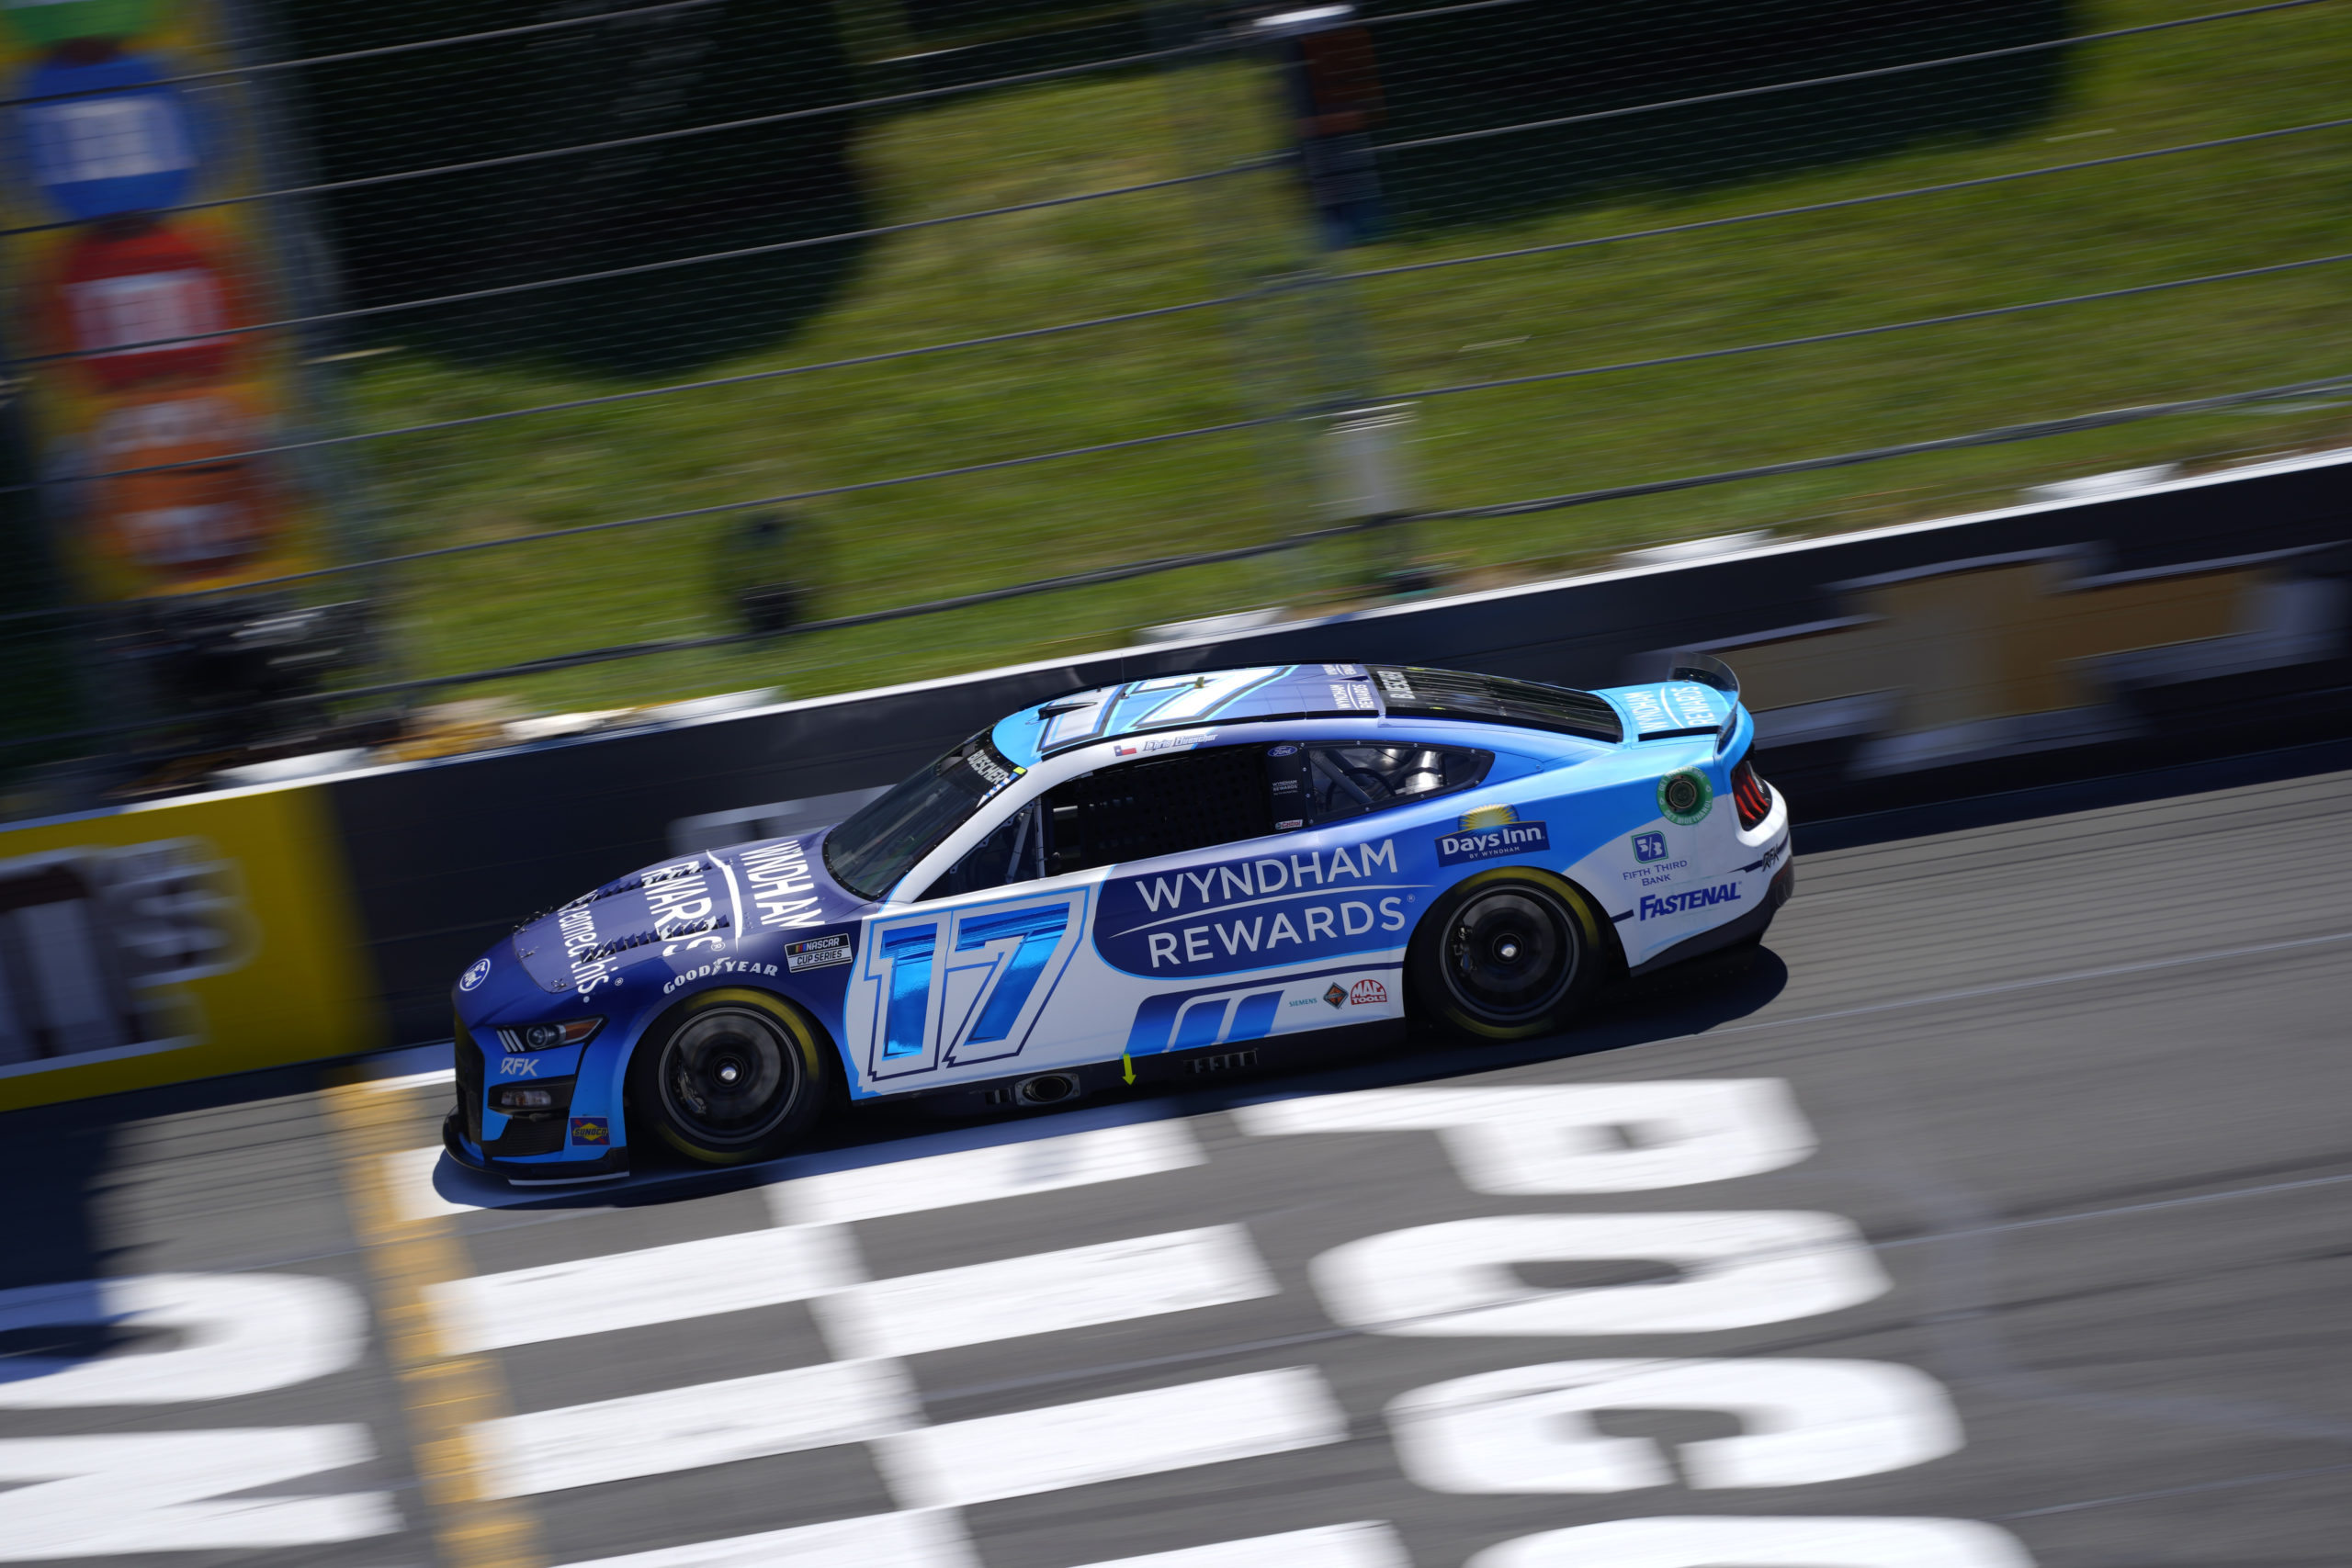 Buescher Finishes 29th at Pocono after Late Issues